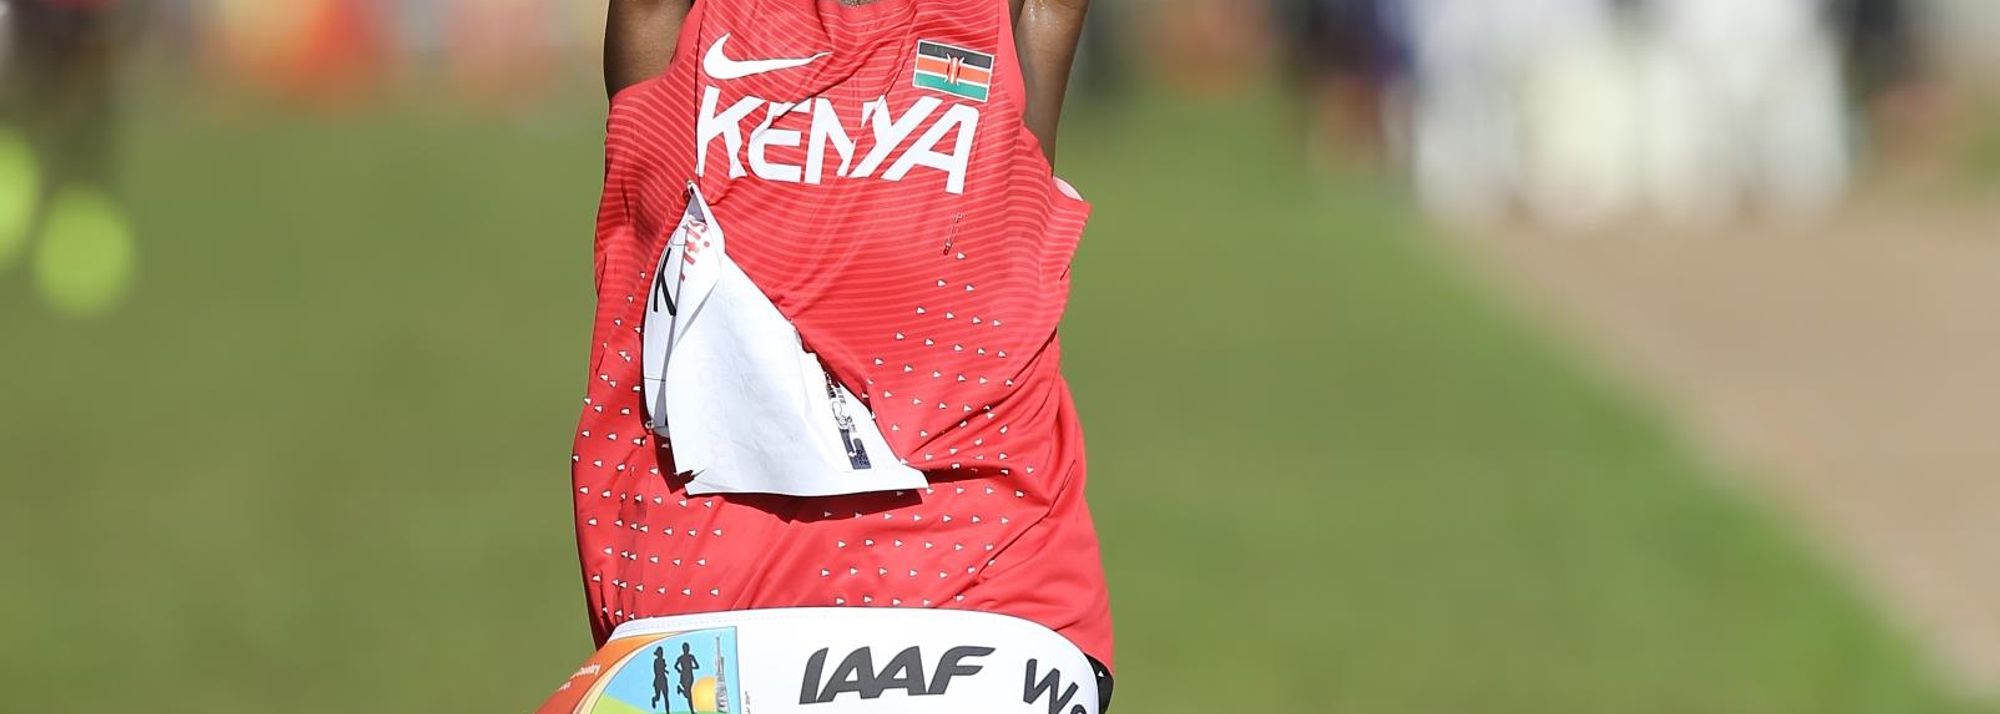 It is the material fairytales are made of: exactly one year to the day after taking the world half marathon title in Cardiff, Geoffrey Kamworor successfully defended his cross country crown from 2015 in 28:24 at the IAAF World Cross Country Championships Kampala 2017. His back-to-back wins mean he is the first senior man in 11 years to retain his title.